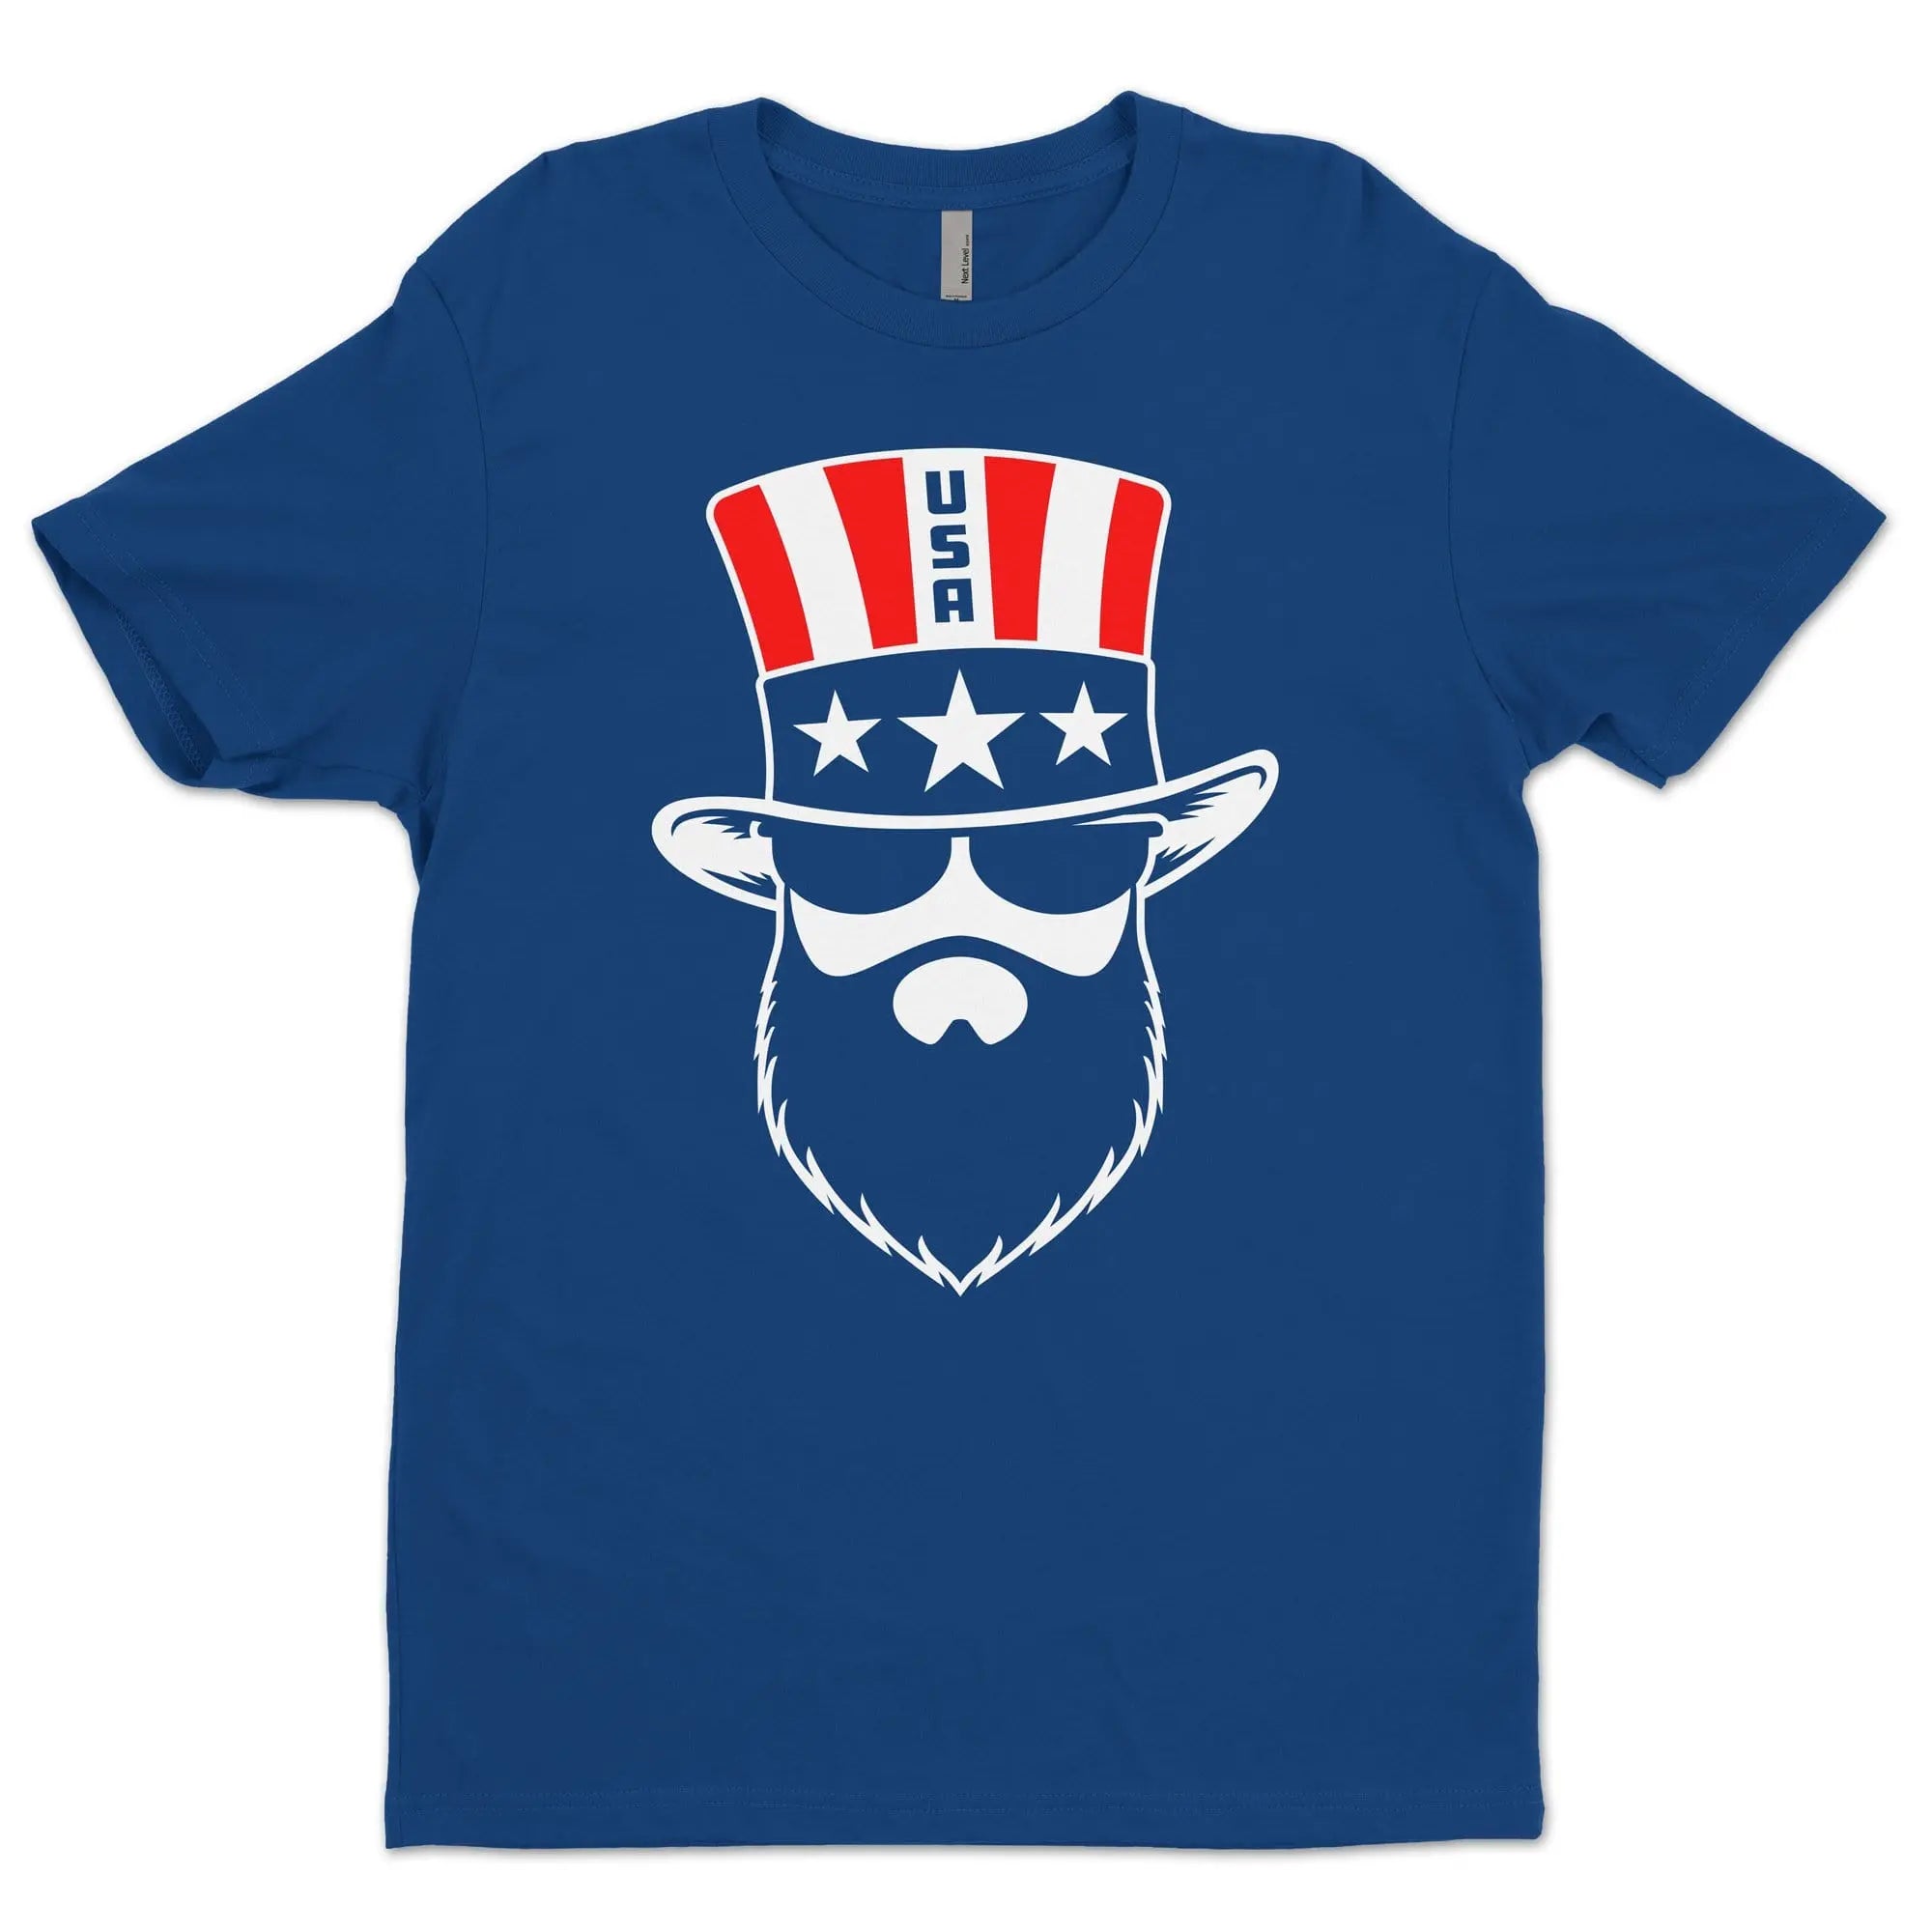 Bearded Patriot No Shave Life T-Shirt - Limited Edition